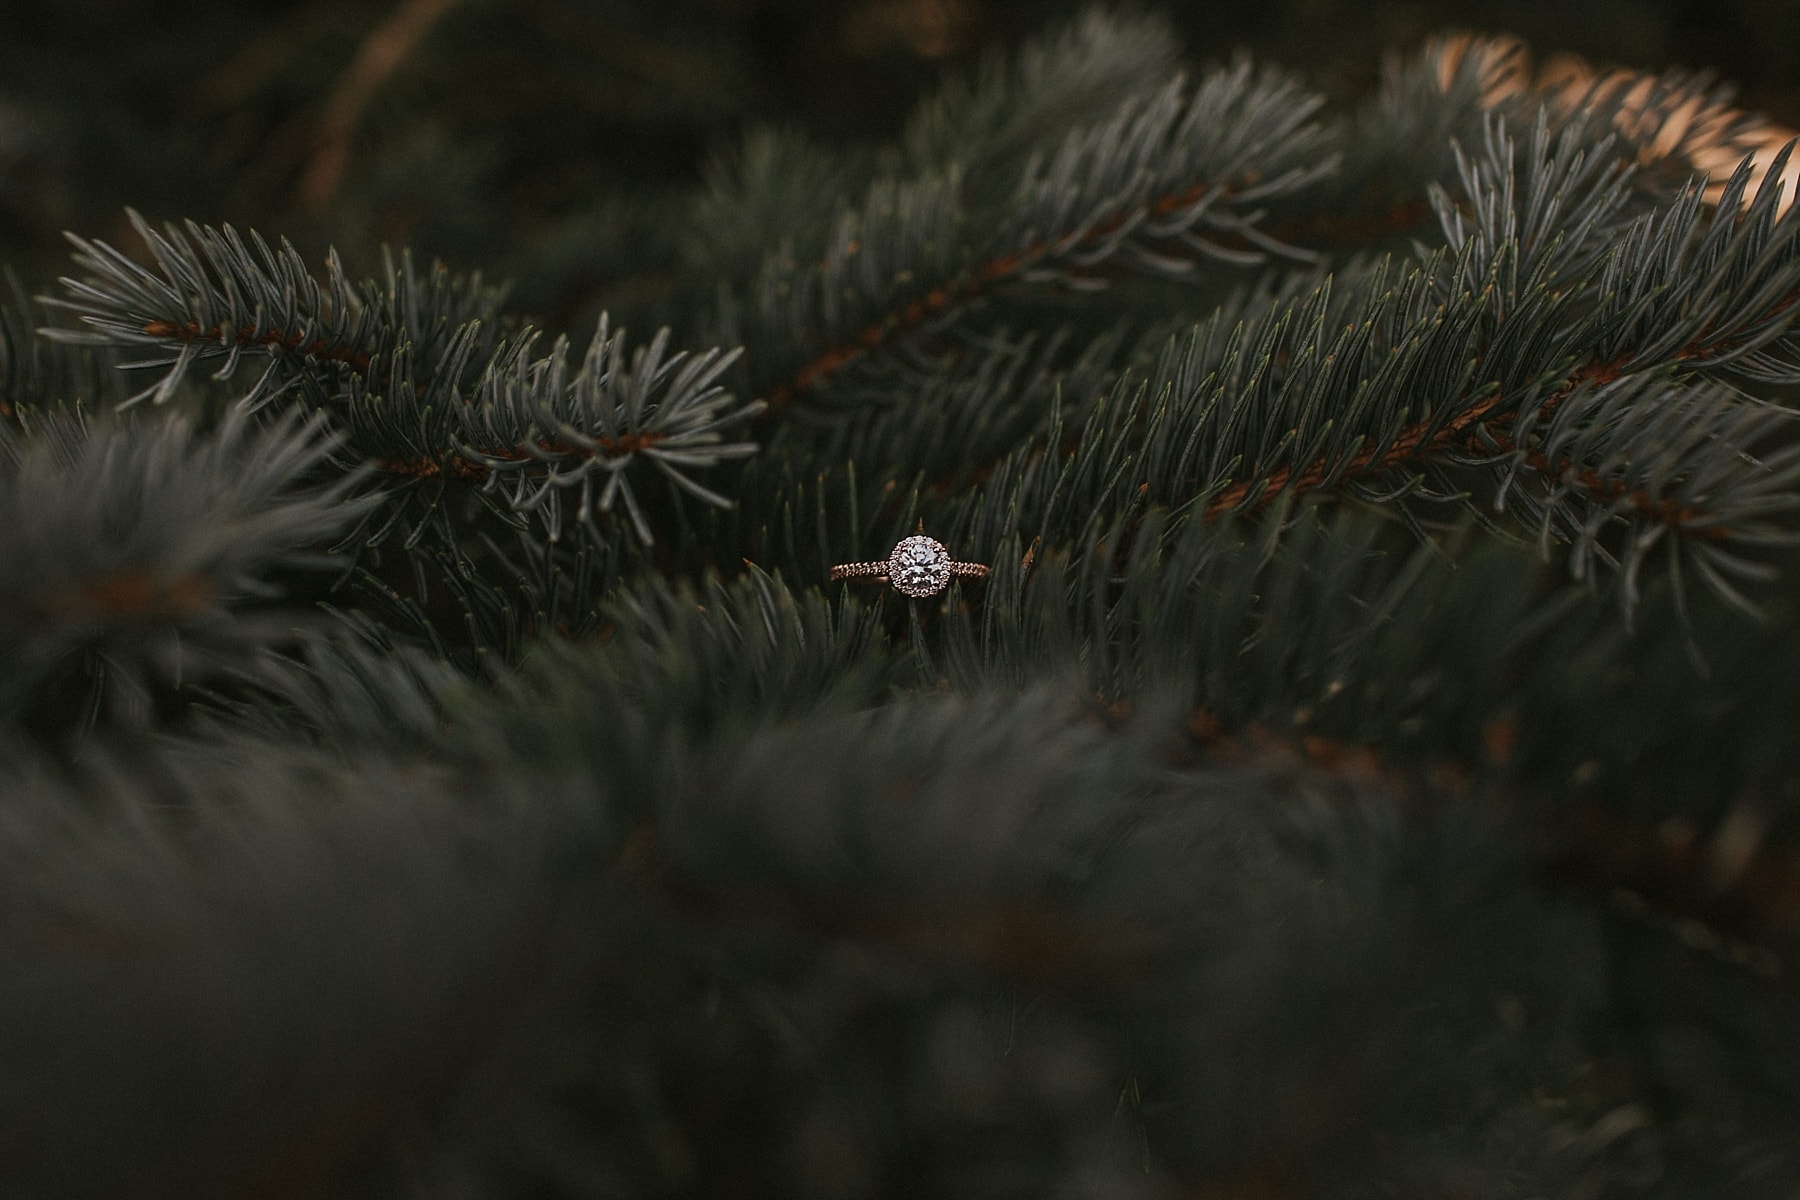 evergreen engagement photography, evergreen lake house, evergreen engagement photographer, summer engagement, midwest couple in the west, rose gold engagement ring